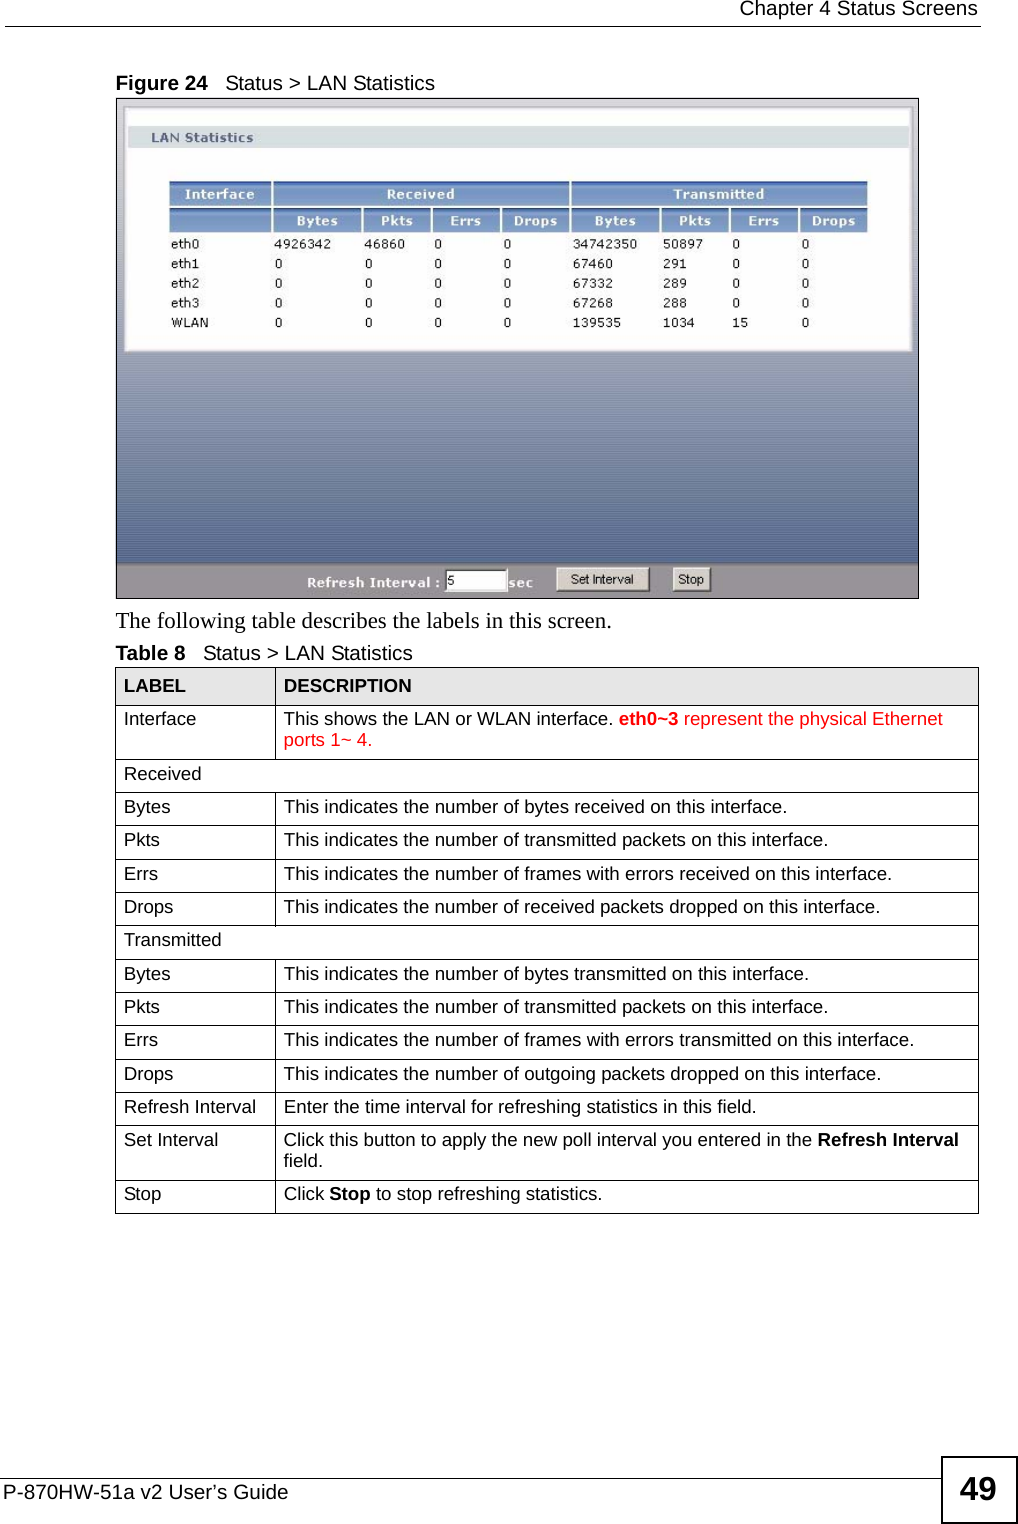  Chapter 4 Status ScreensP-870HW-51a v2 User’s Guide 49Figure 24   Status &gt; LAN Statistics The following table describes the labels in this screen. Table 8   Status &gt; LAN StatisticsLABEL DESCRIPTIONInterface This shows the LAN or WLAN interface. eth0~3 represent the physical Ethernet ports 1~ 4. ReceivedBytes This indicates the number of bytes received on this interface.Pkts This indicates the number of transmitted packets on this interface.Errs This indicates the number of frames with errors received on this interface.Drops This indicates the number of received packets dropped on this interface.TransmittedBytes This indicates the number of bytes transmitted on this interface.Pkts This indicates the number of transmitted packets on this interface.Errs This indicates the number of frames with errors transmitted on this interface.Drops This indicates the number of outgoing packets dropped on this interface.Refresh Interval Enter the time interval for refreshing statistics in this field.Set Interval Click this button to apply the new poll interval you entered in the Refresh Interval field.Stop Click Stop to stop refreshing statistics.